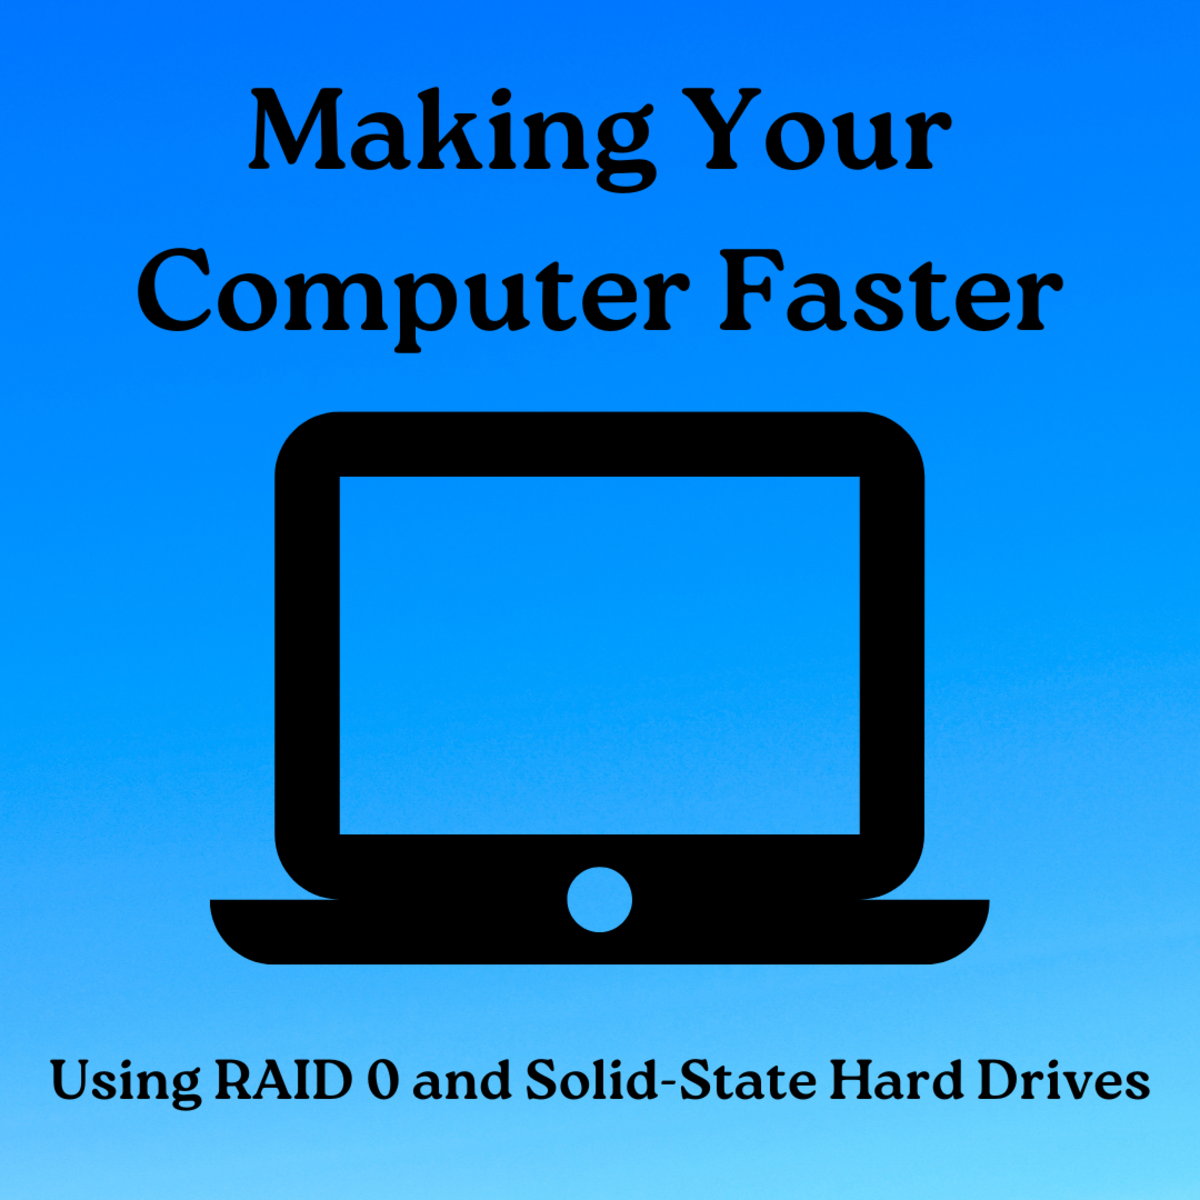 How to Make Your Computer Faster With RAID 0 and Solid-State Hard Drives